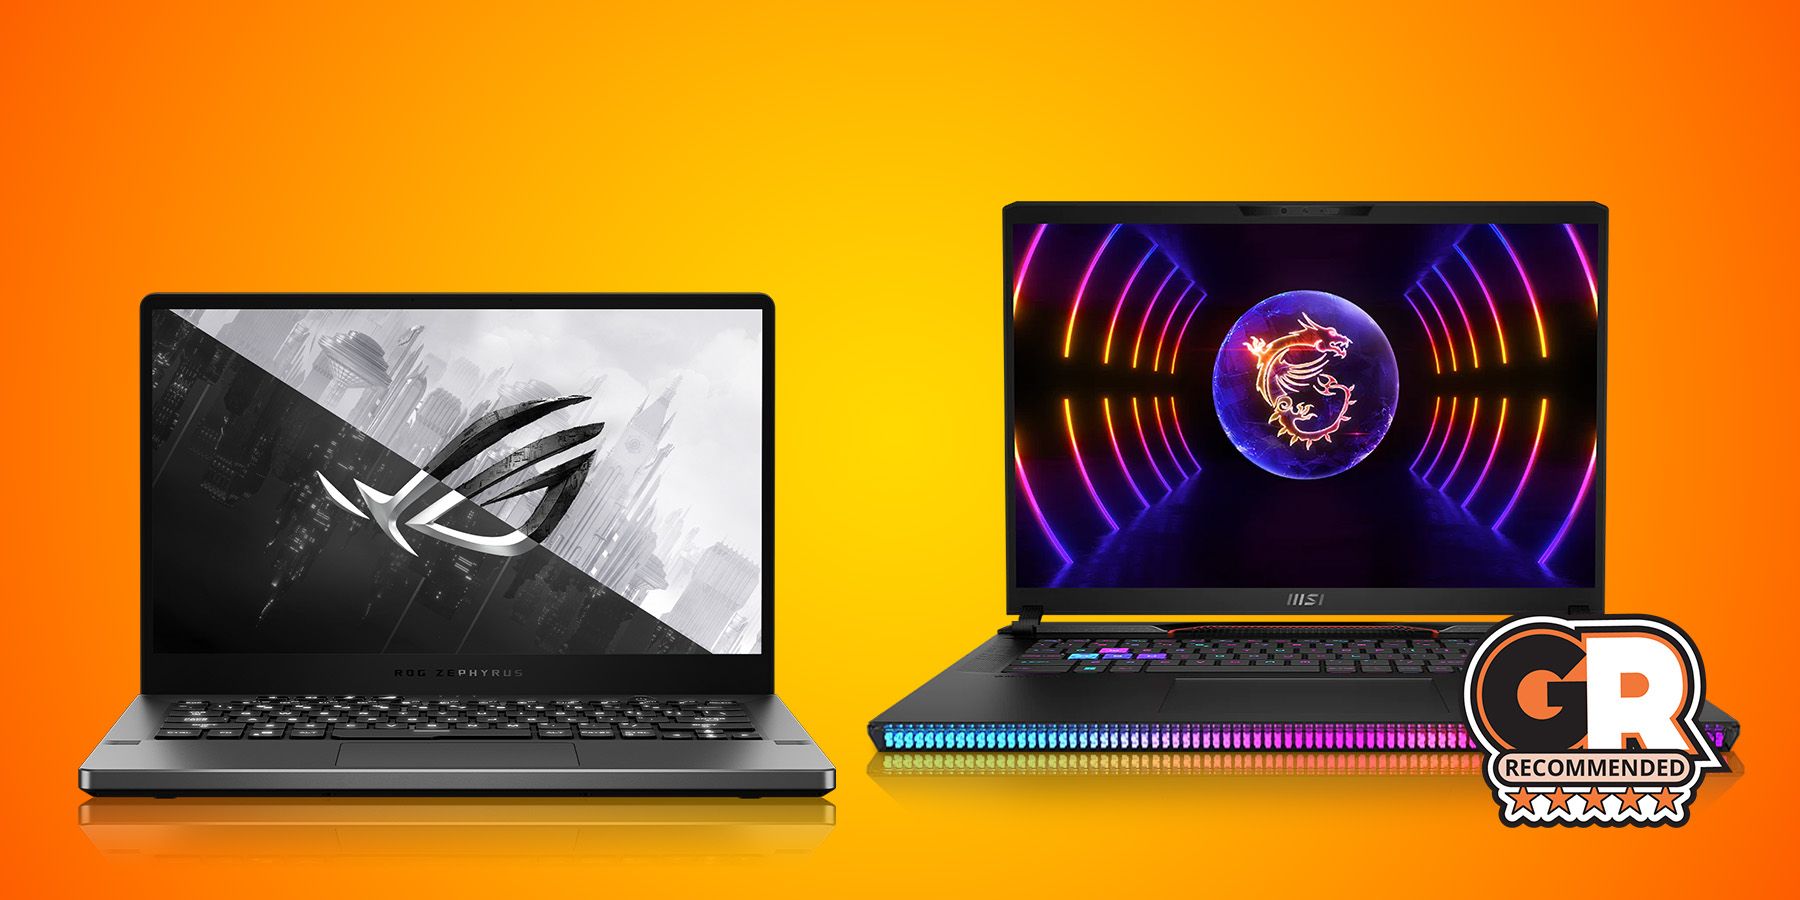 Best laptop deals today: Home use laptops, gaming laptops and more